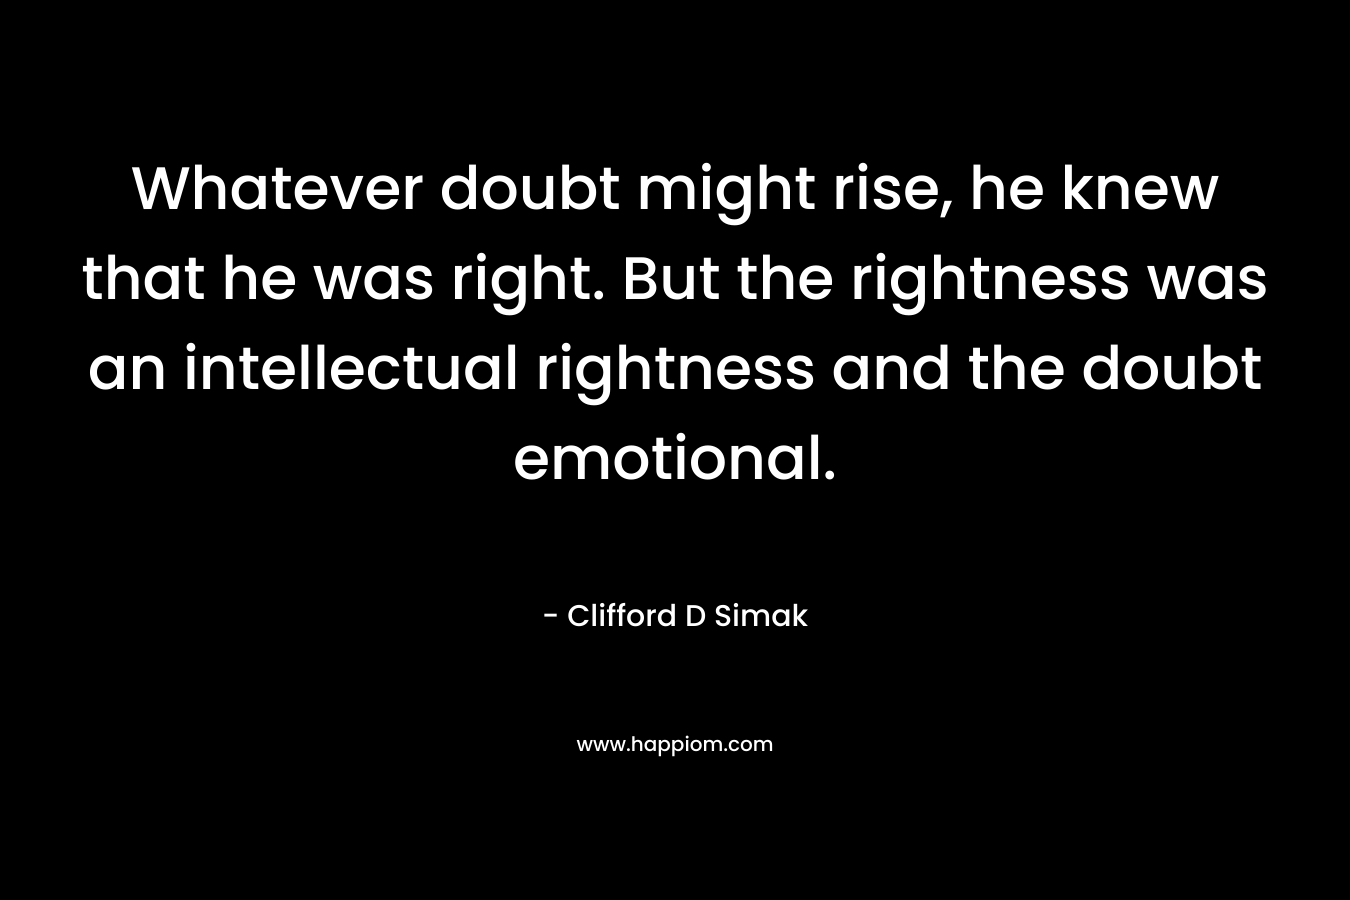 Whatever doubt might rise, he knew that he was right. But the rightness was an intellectual rightness and the doubt emotional.